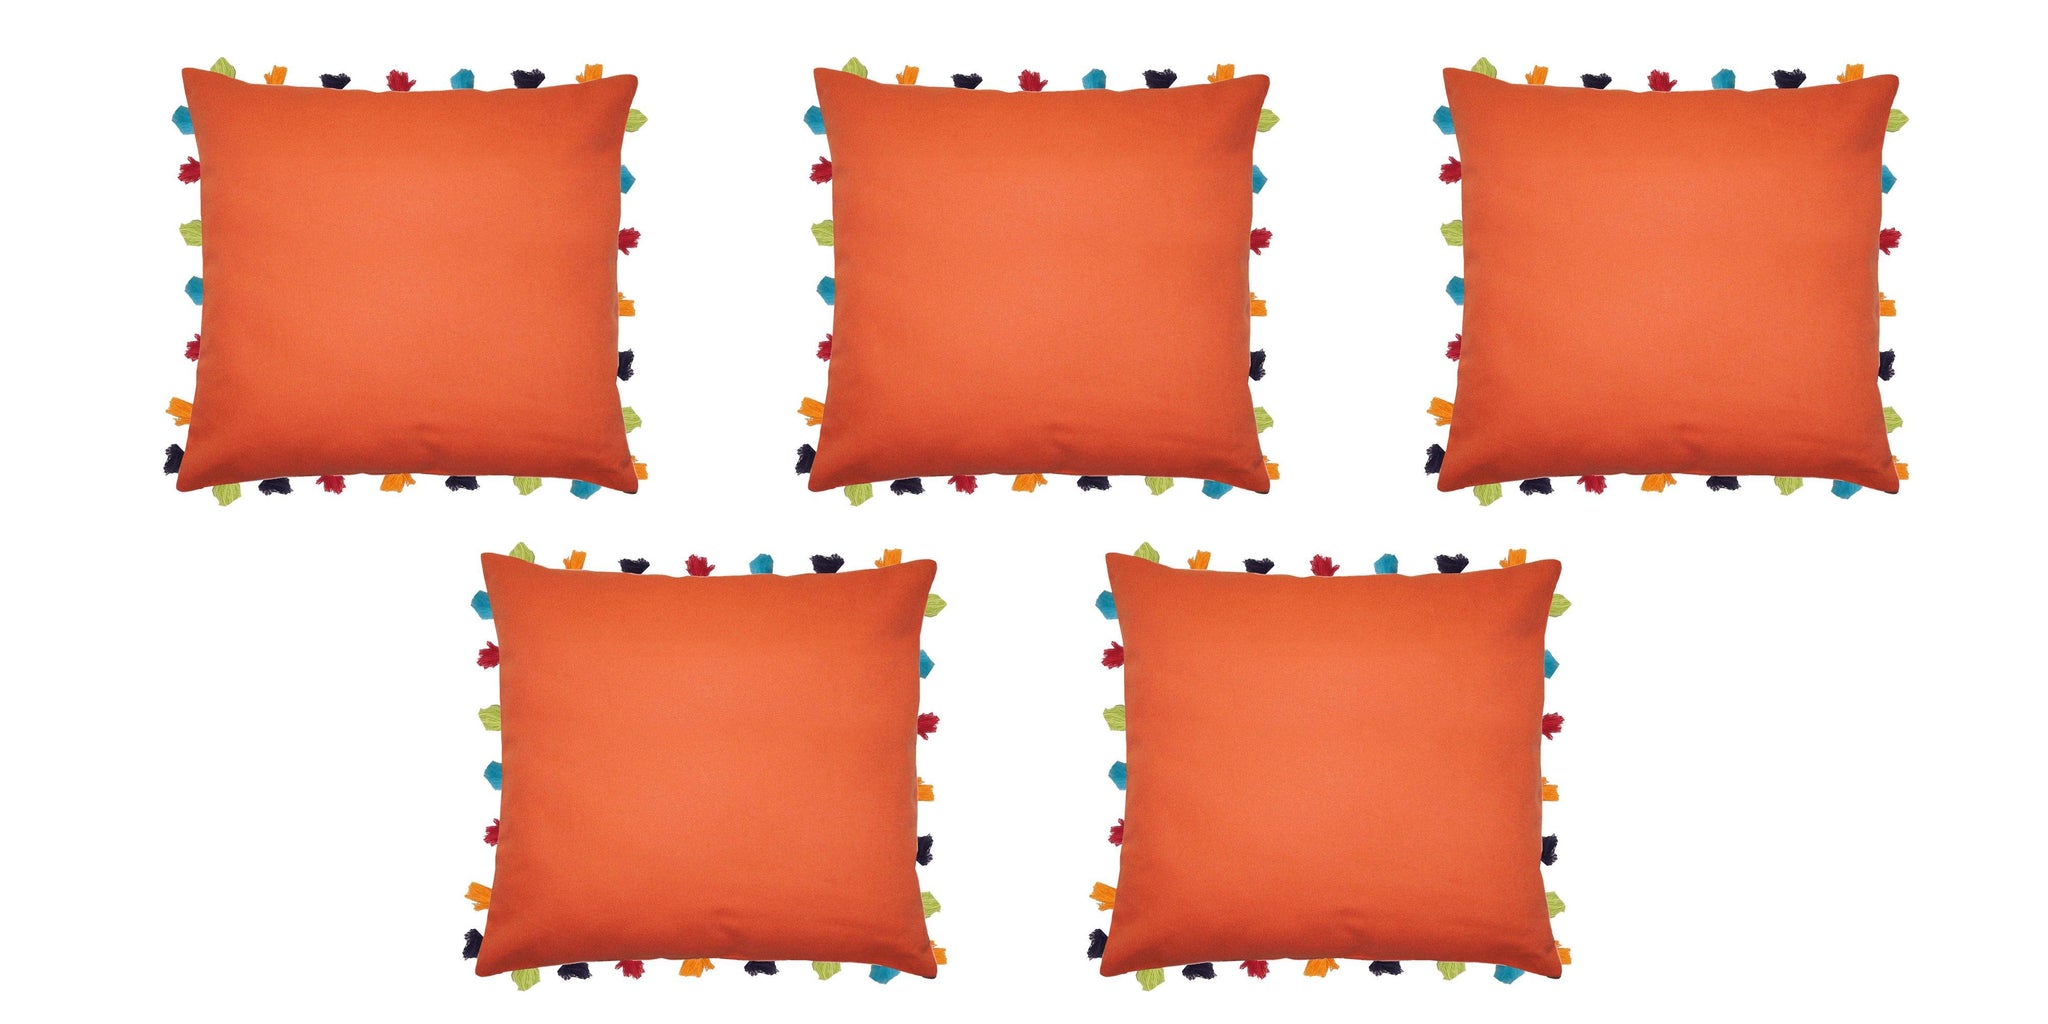 Lushomes Red Wood Cushion Cover with Colorful tassels (5 pcs, 20 x 20”) - Lushomes